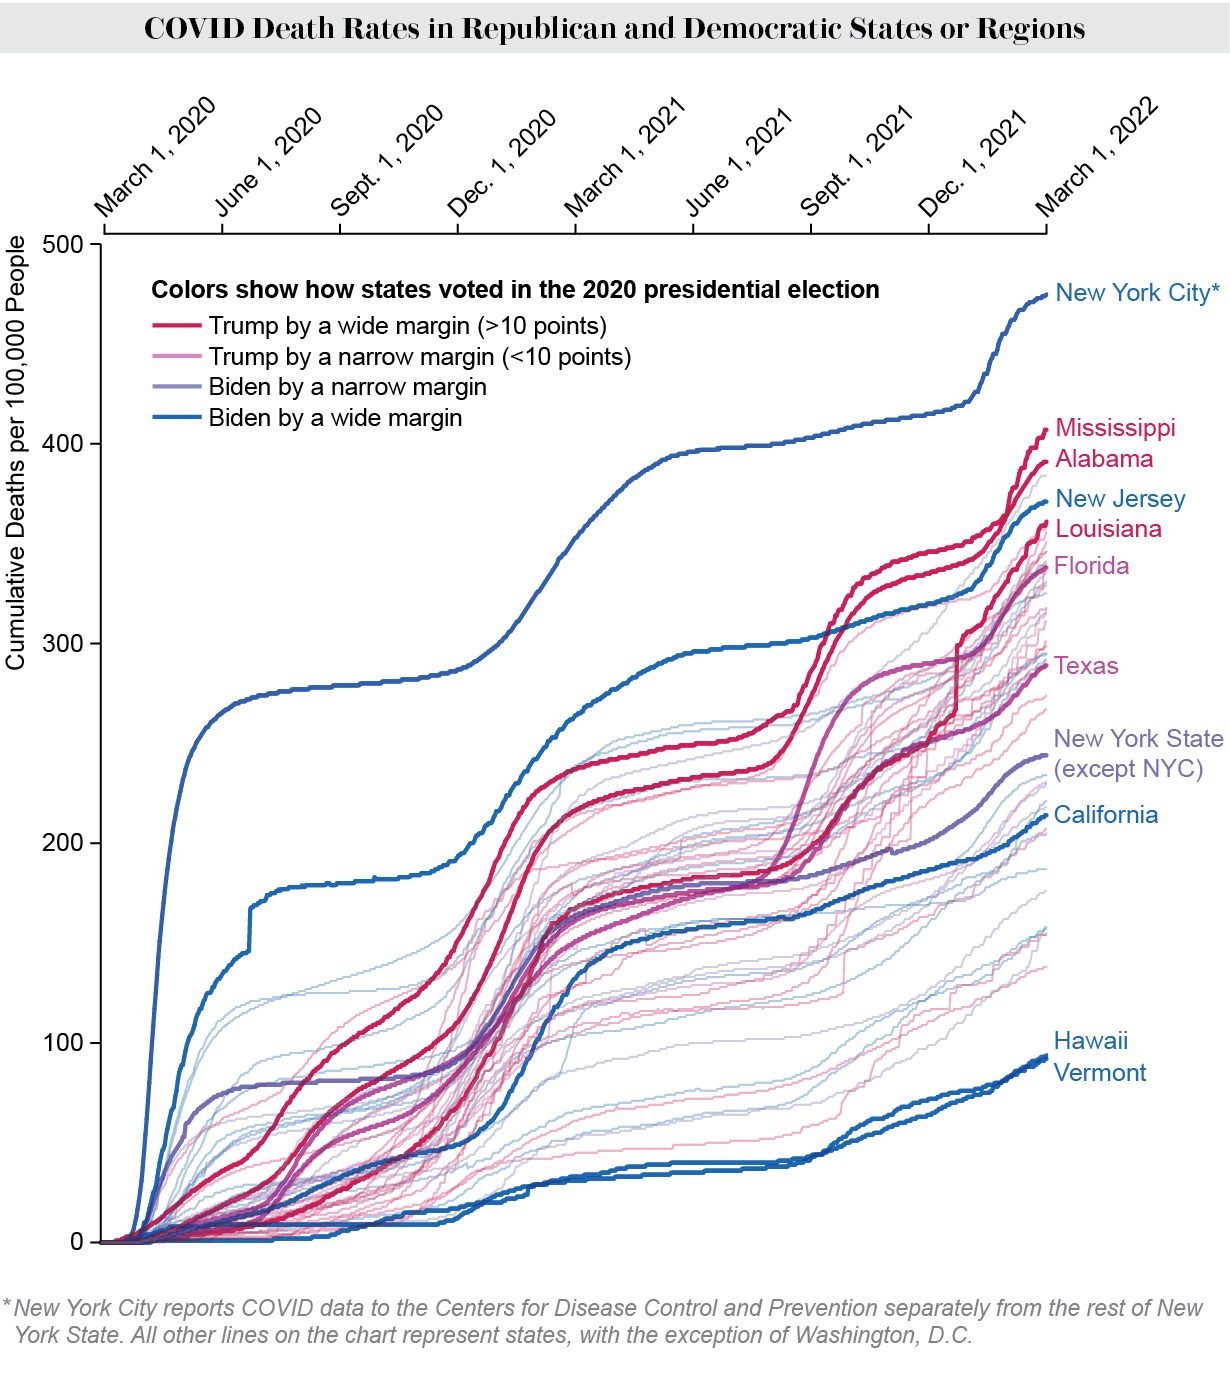 Chart shows cumulative U.S. COVID death rates from March 2020 to March 2022 in Republican and Democratic states or regions.